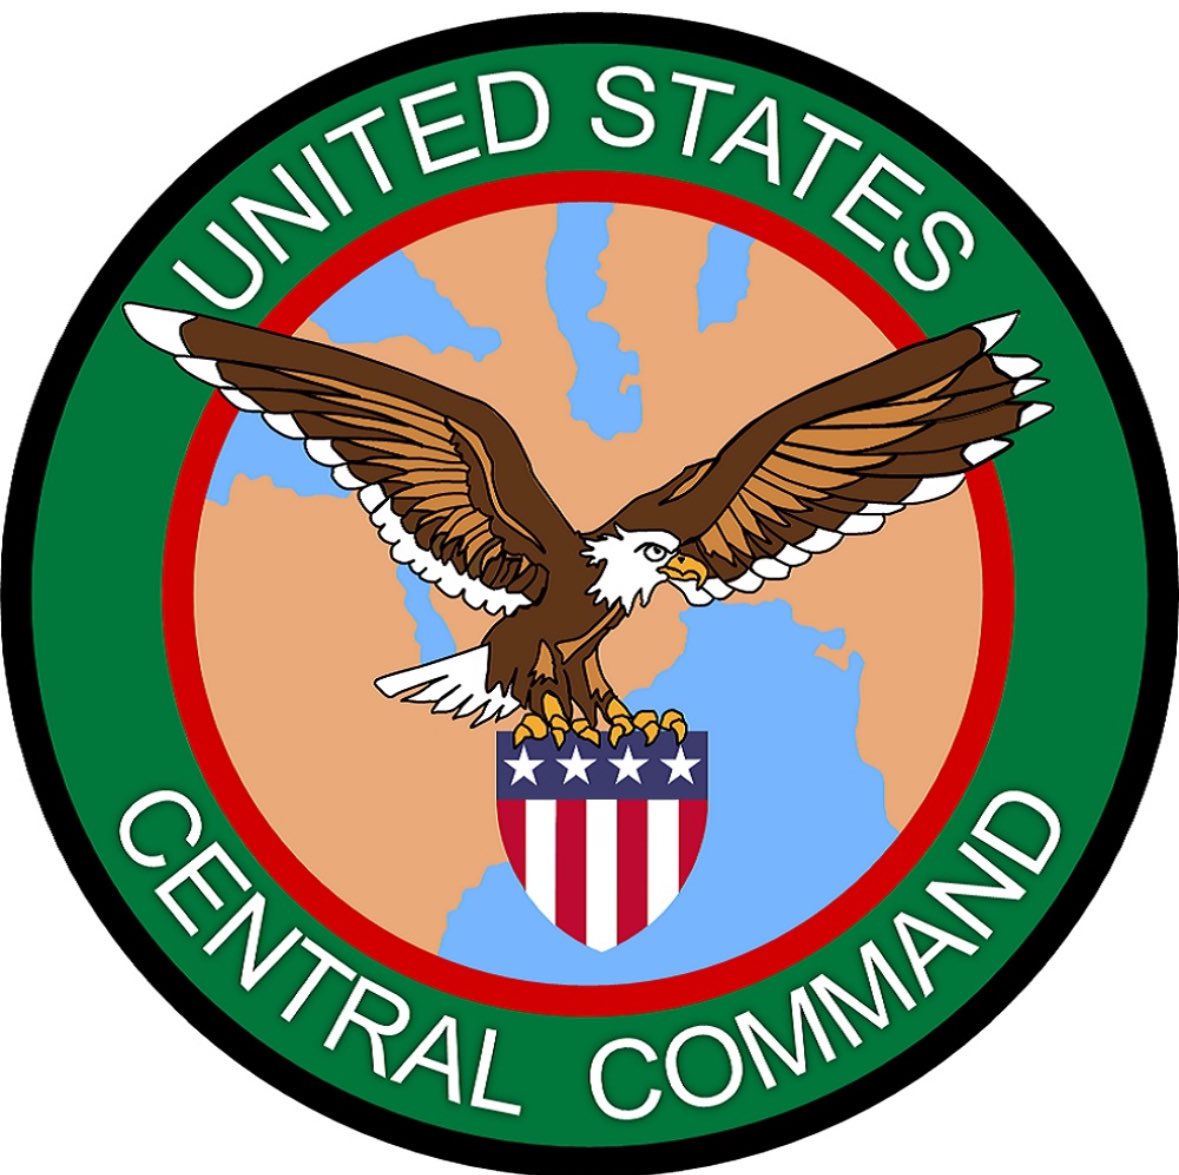 May 11 CENTCOM Update
 
TAMPA, Fla. – At approximately 8:45 p.m.(Sanaa time) on May 10, Iranian-backed Houthis launched an uncrewed aerial system (UAS) over the Gulf of Aden from Houthi controlled areas in Yemen. A coalition aircraft successfully engaged the UAS. There were no… https://t.co/E8bQ83jW6T https://t.co/7N70V70TZ7